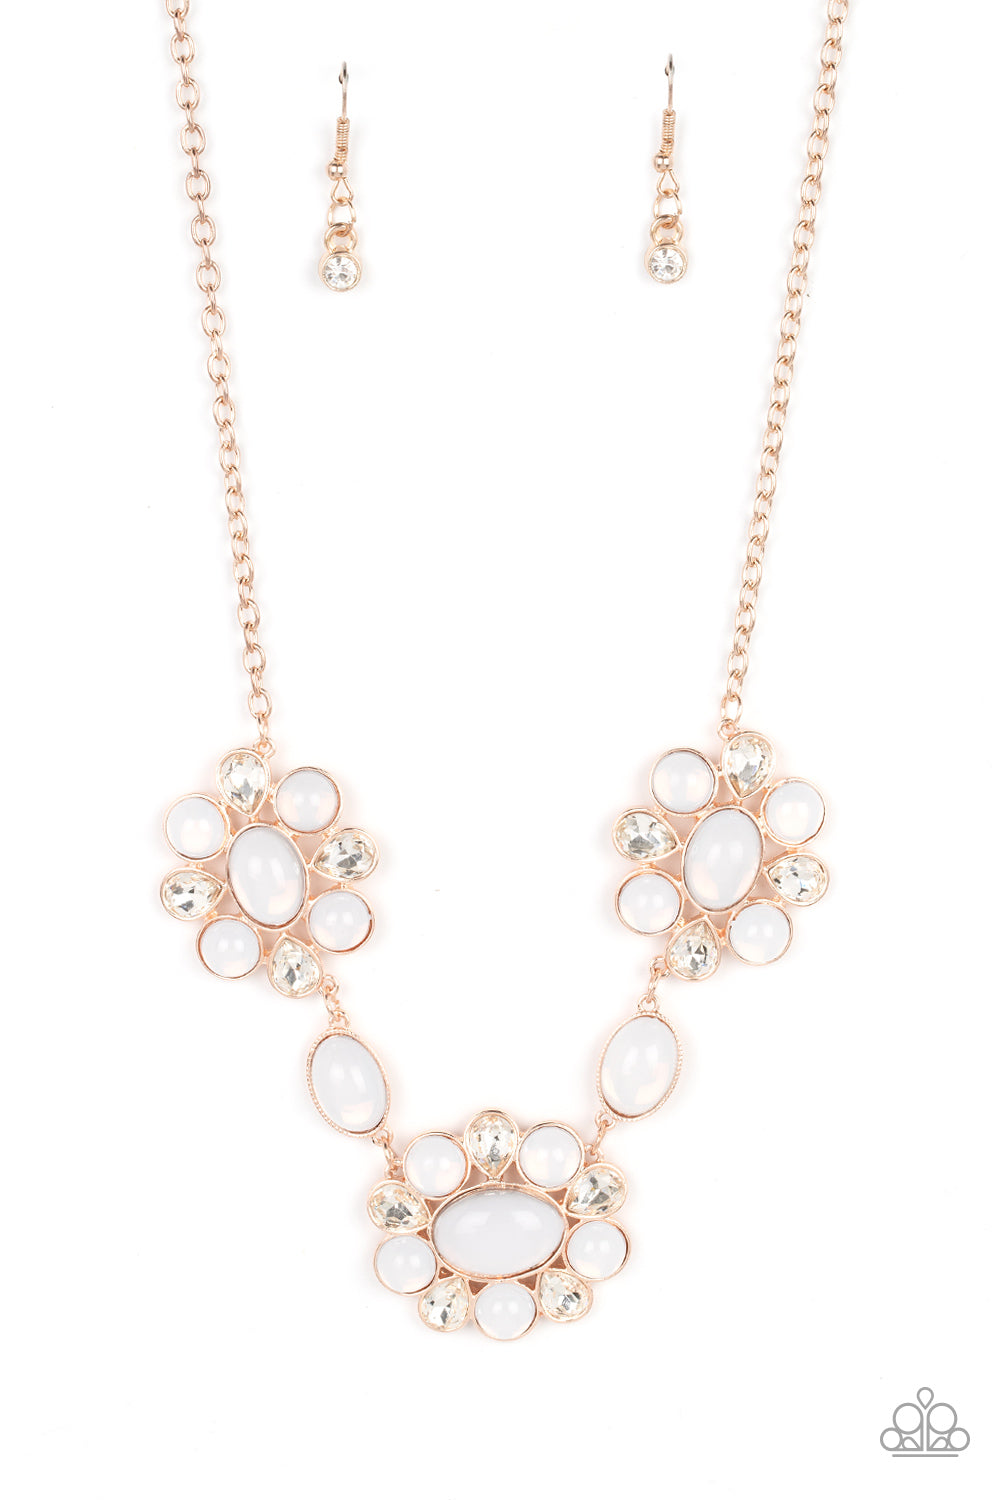 Your Chariot Awaits - rose gold - Paparazzi necklace